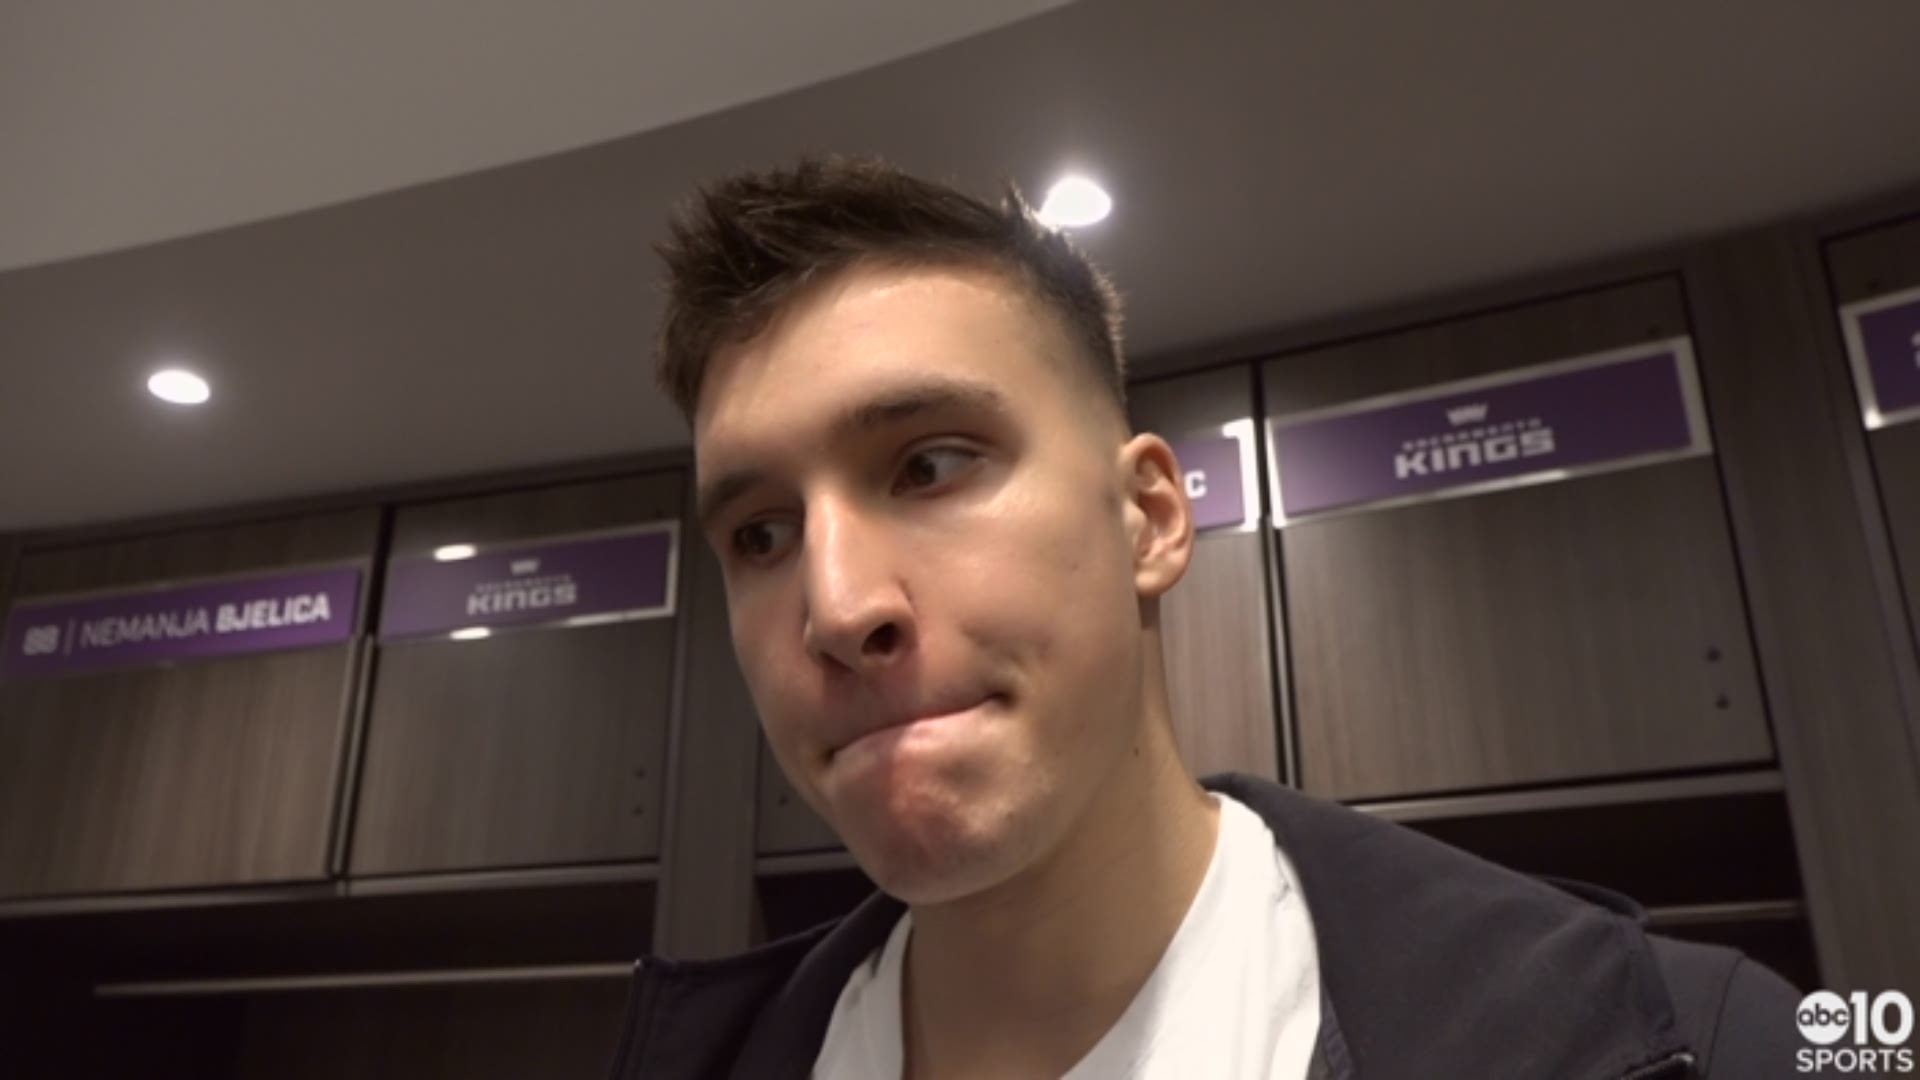 Kings guard Bogdan Bogdanovic talks about being disappointed in his team's performance against the Utah Jazz coming off losing in Oakland to the Warriors the previous night, and the upcoming days off coming at a good time for Sacramento.